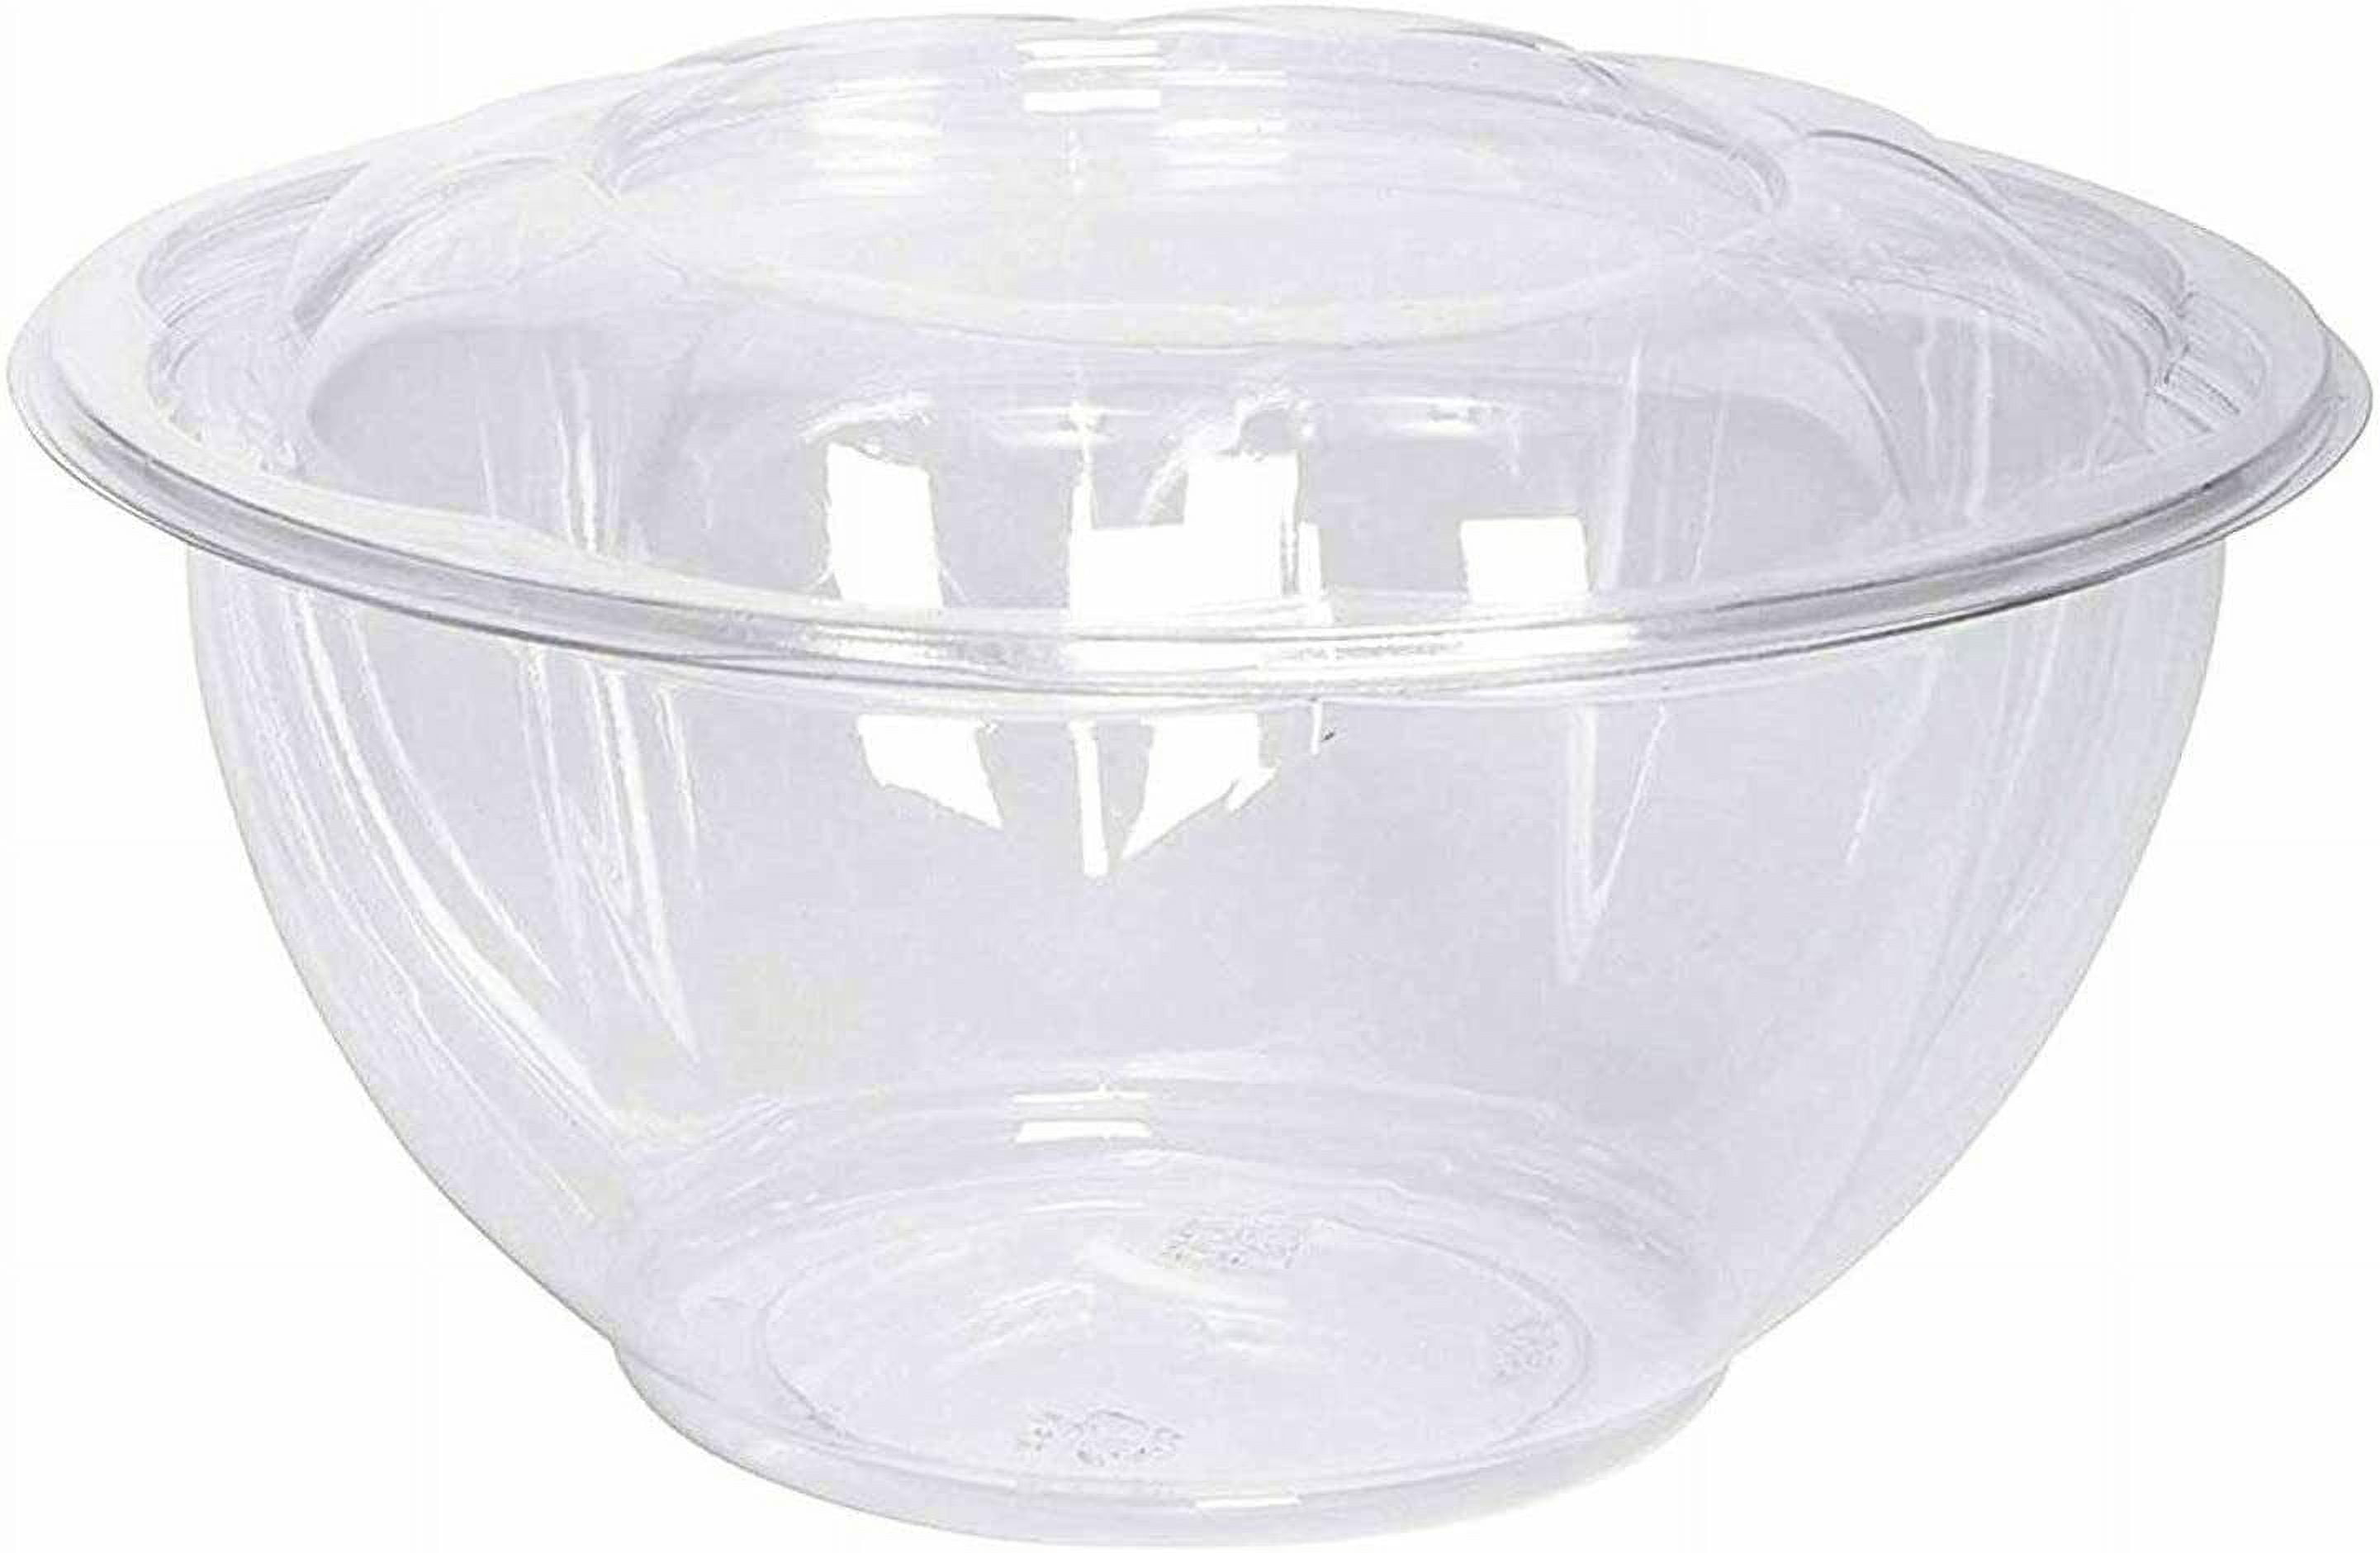 Stock Your Home 18oz Clear Plastic Salad Bowls with Lids Disposable (50 Pack) Mini Takeout Container with Snap on Lid for Fruit Salads, Quinoa